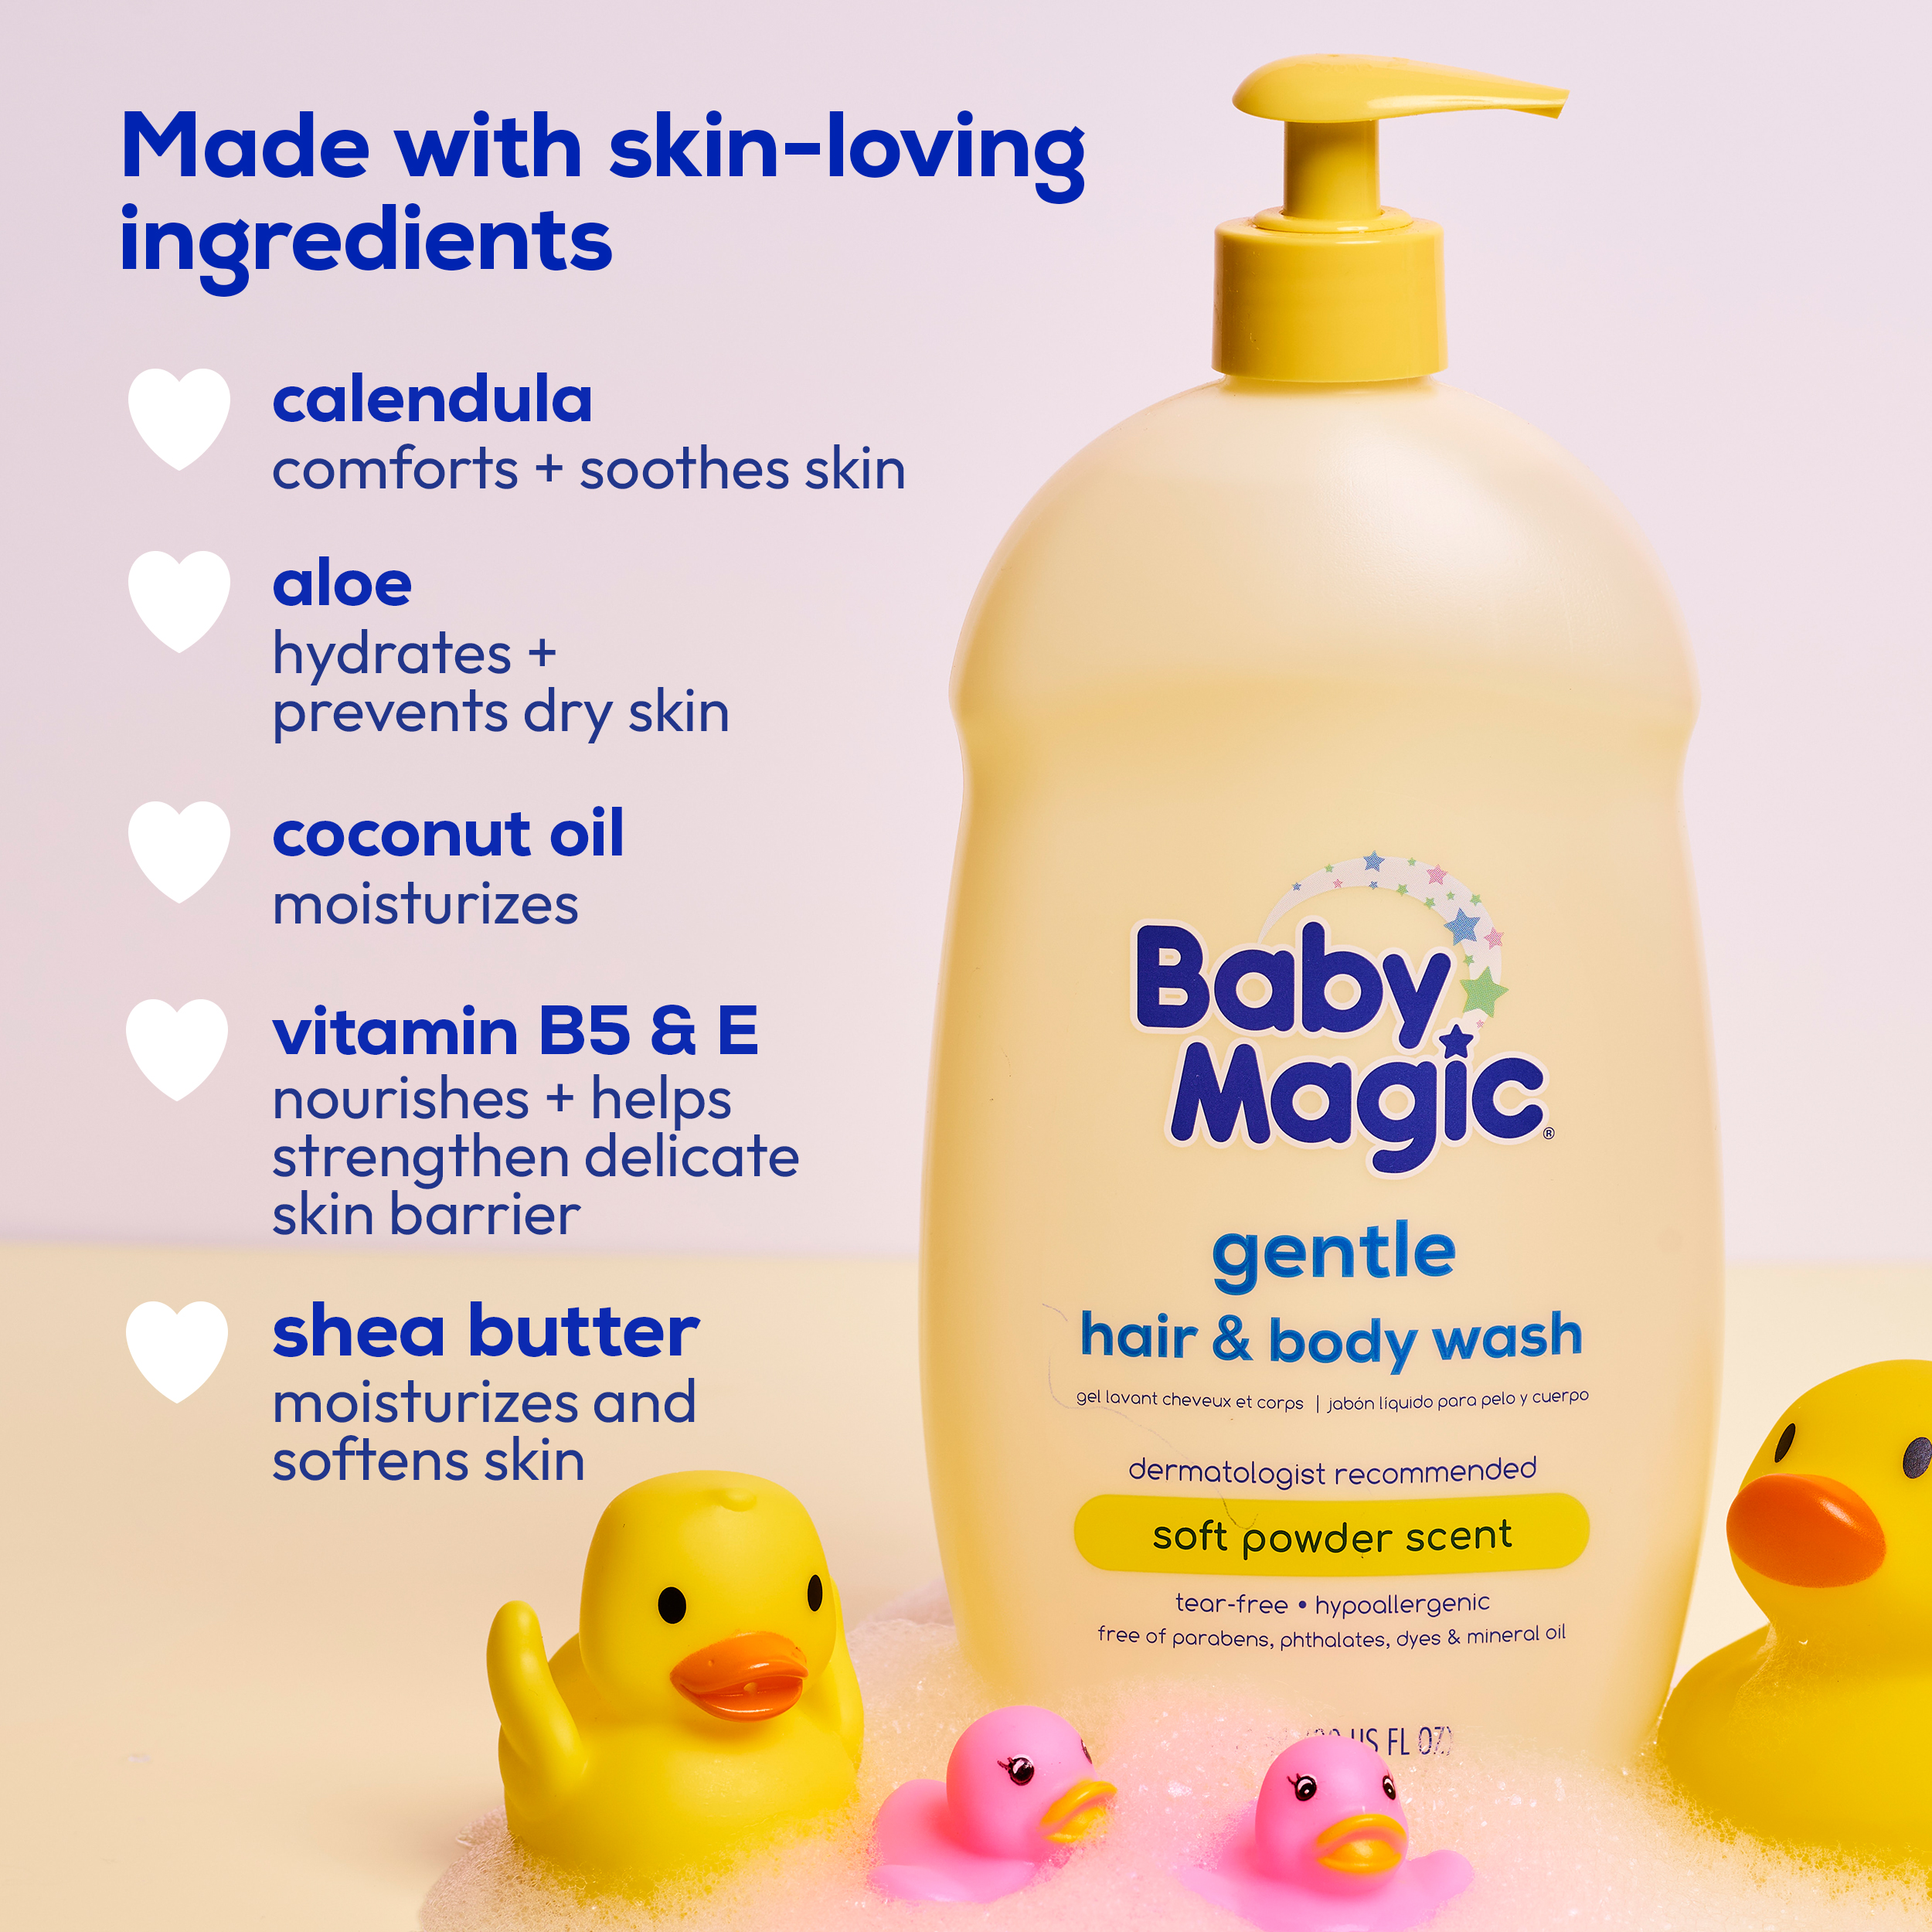 Baby Magic Tear-Free Gentle Hair and Body Wash, Soft Powder Scent, Hypoallergenic, 30 oz - image 4 of 7